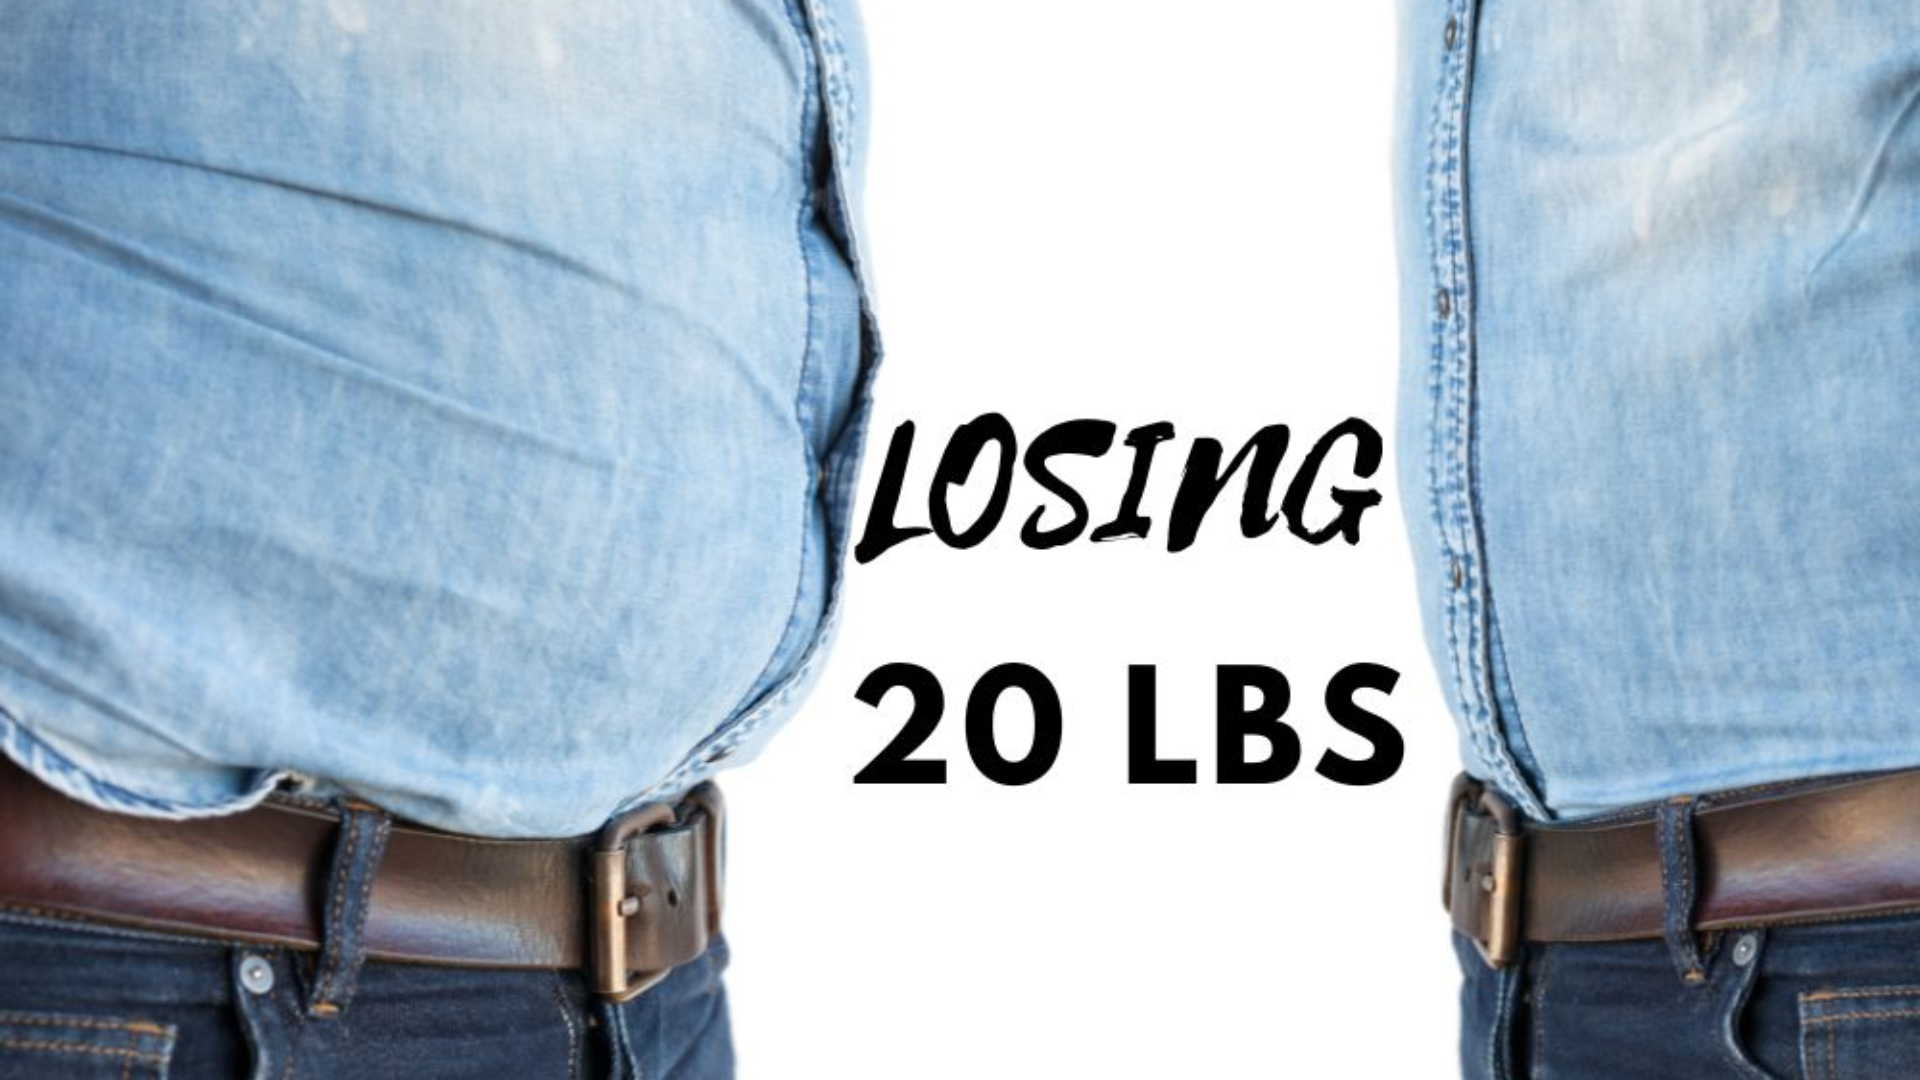 How to Lose 20 Pounds in a Month Quickly and Safely?